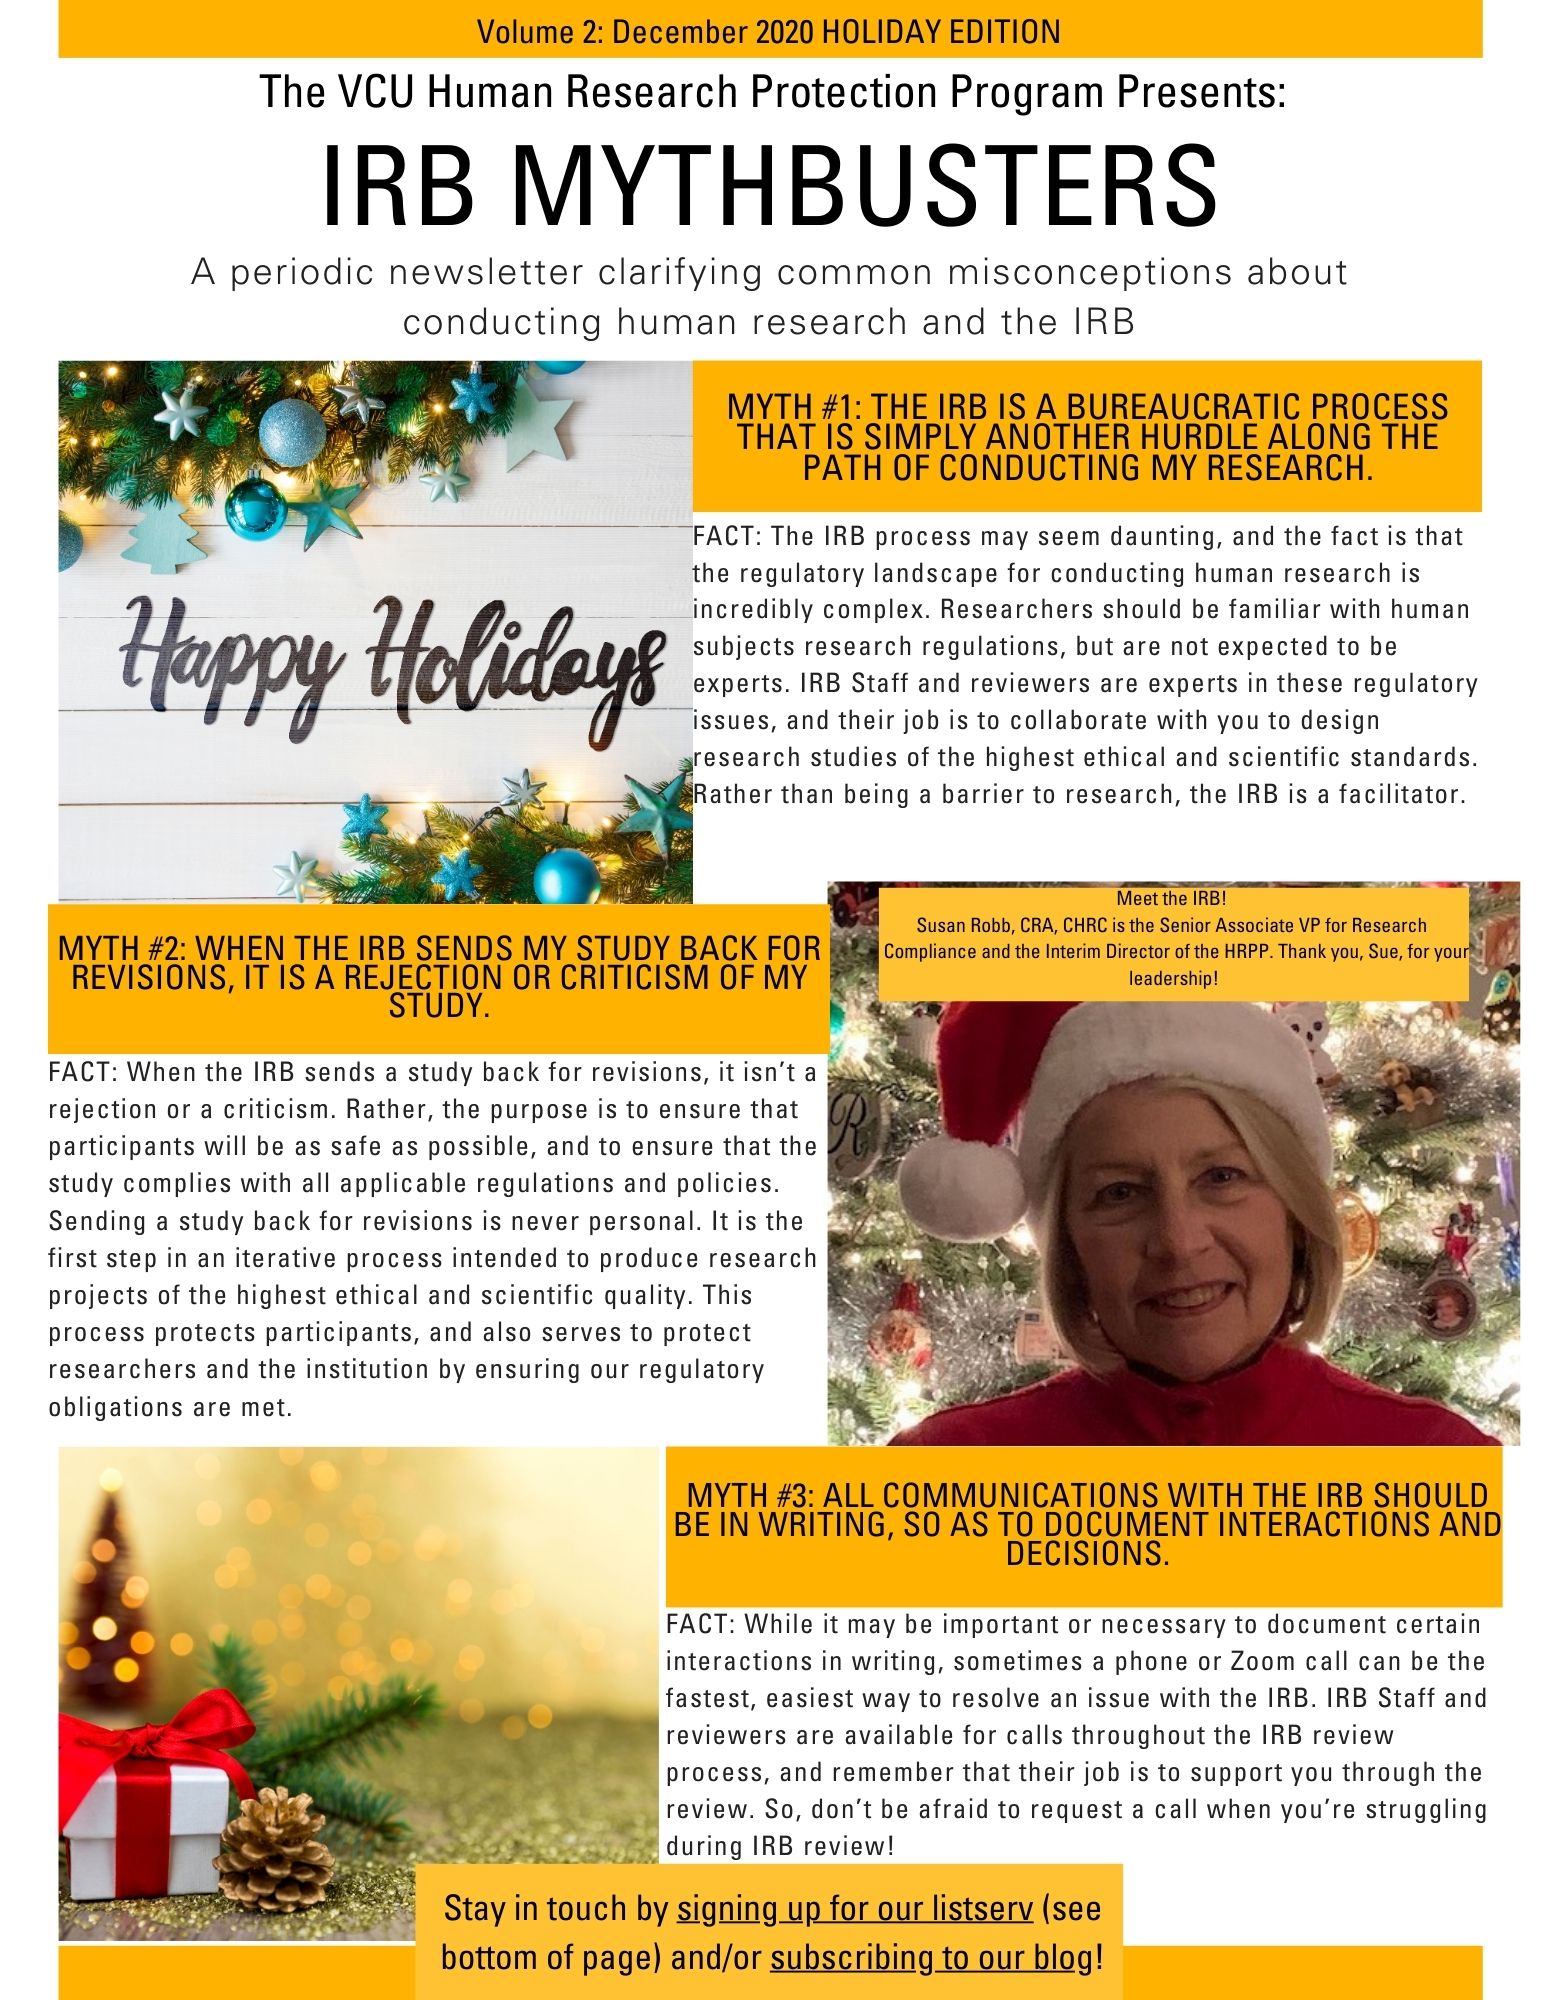 This is an image of the IRB Mythbusters Newsletter. It includes two Holiday-themed images, and a third image, which shows a smiling woman wearing a Santa hat, and standing in front of a decorated Christmas tree. The caption to that picture says “Meet the IRB! Susan Robb, CRA, CHRC is the Senior Associate VP for Research Compliance and the Interim Director of the HRPP. Thank you, Sue, for your leadership!” The rest of the newsletter contains the same myths and facts as the blog post.